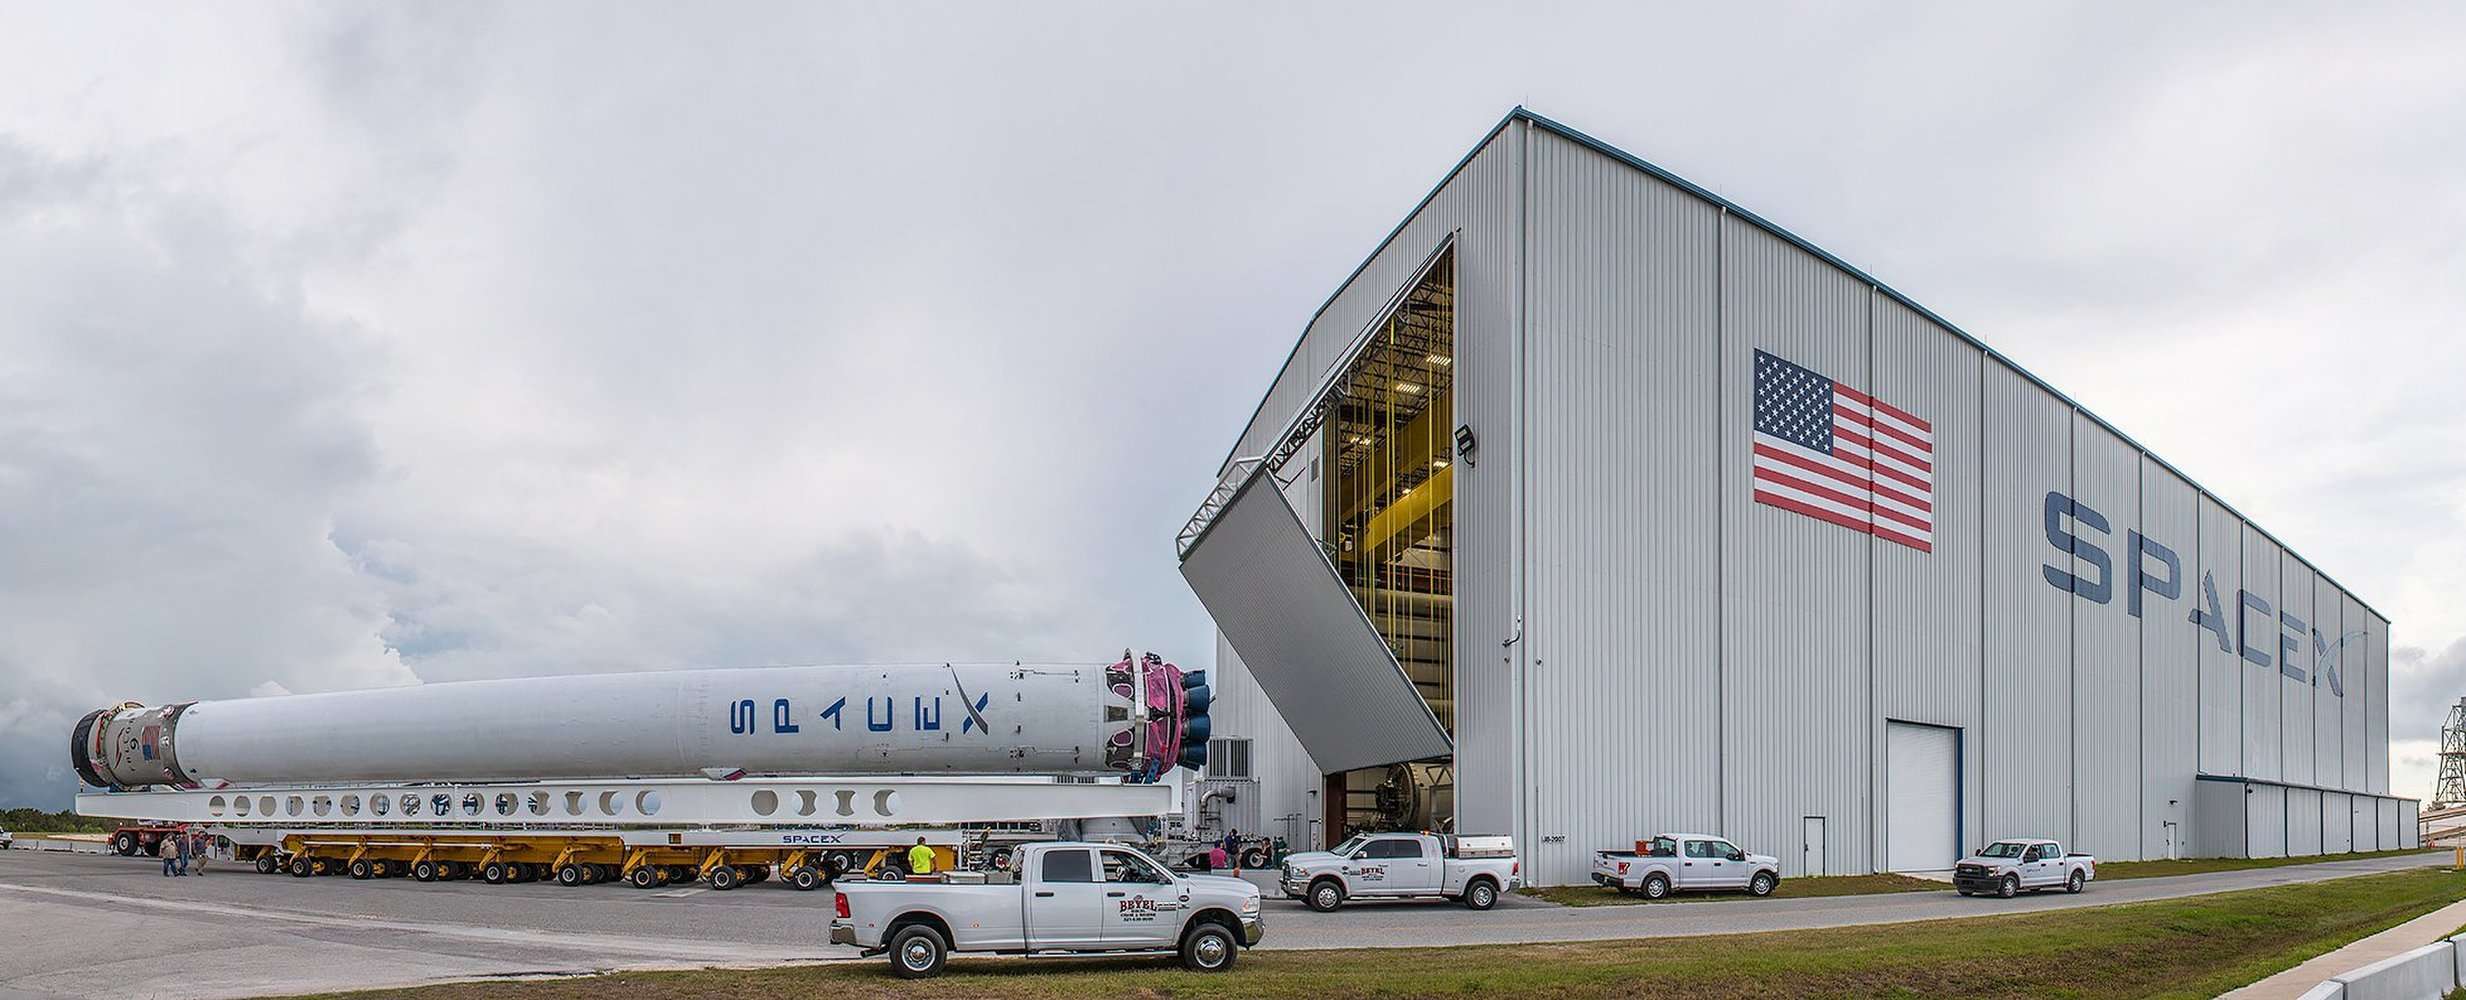 image for SpaceX Preps Its Next Used Rocket for Launch (Photo)